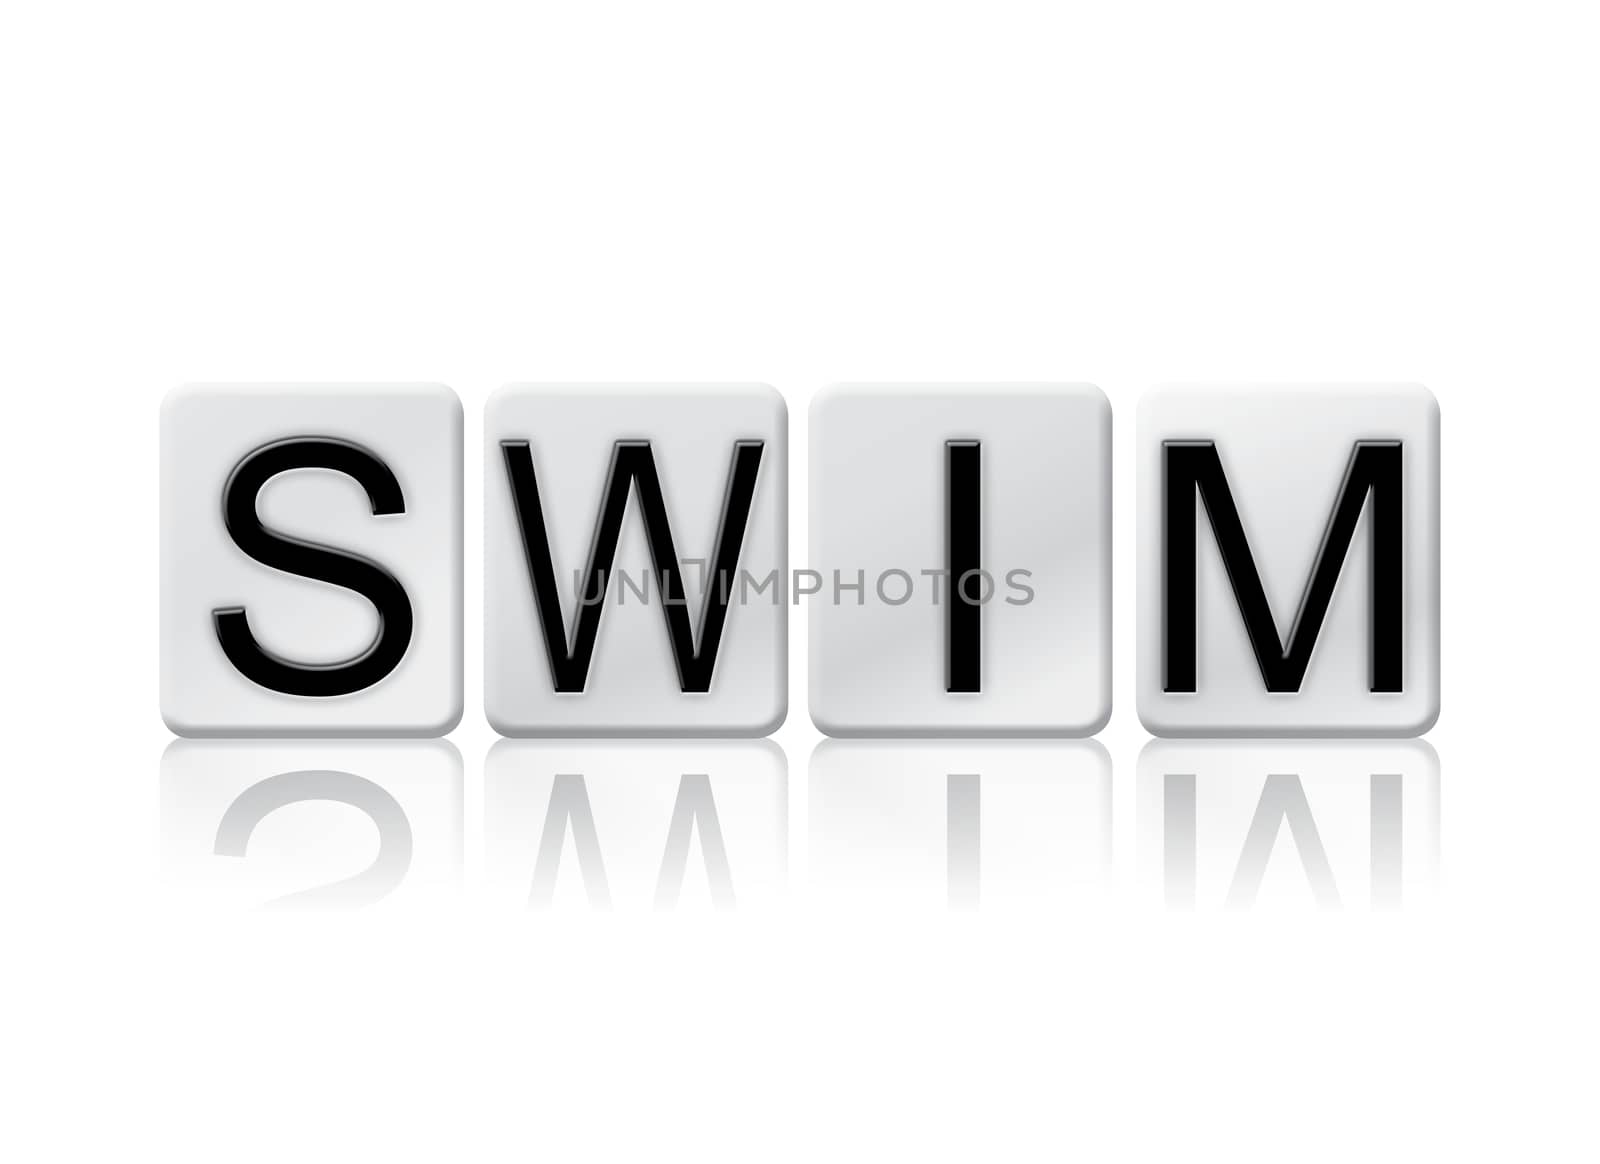 Swim Isolated Tiled Letters Concept and Theme by enterlinedesign